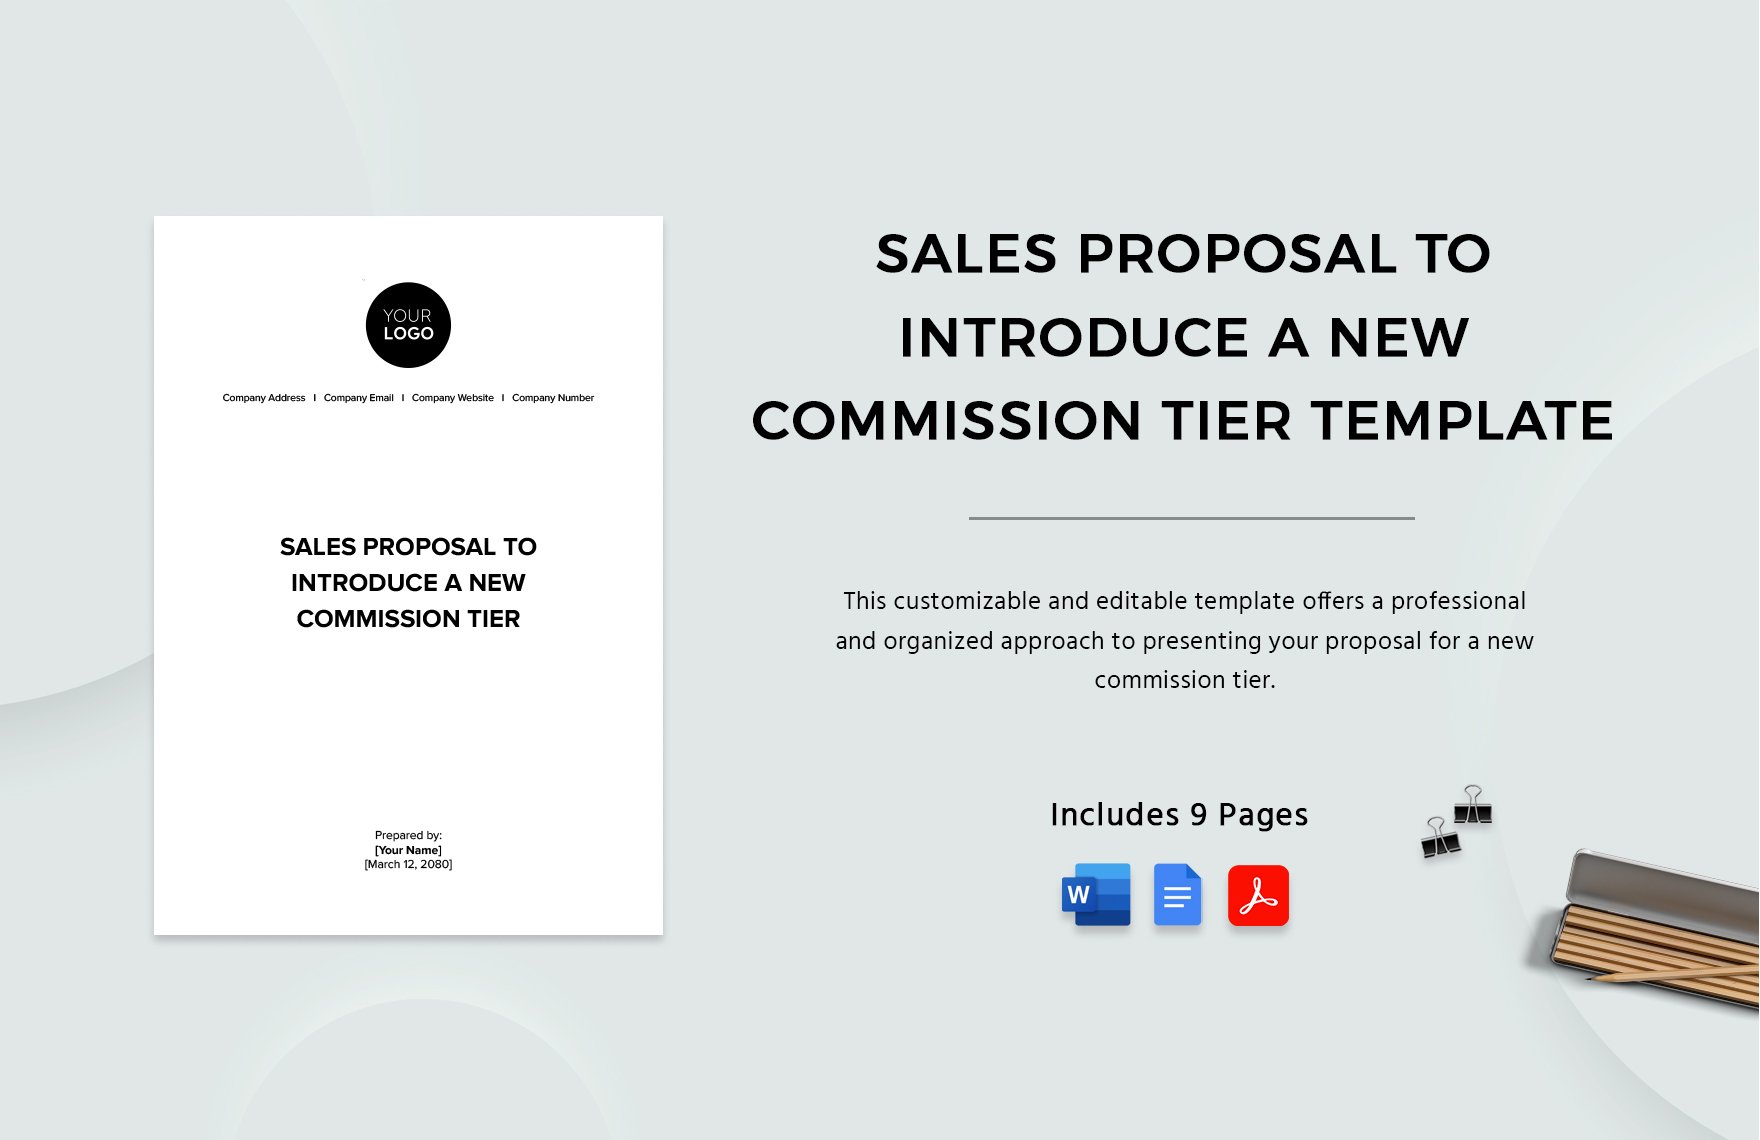 Sales Proposal to Introduce a New Commission Tier Template